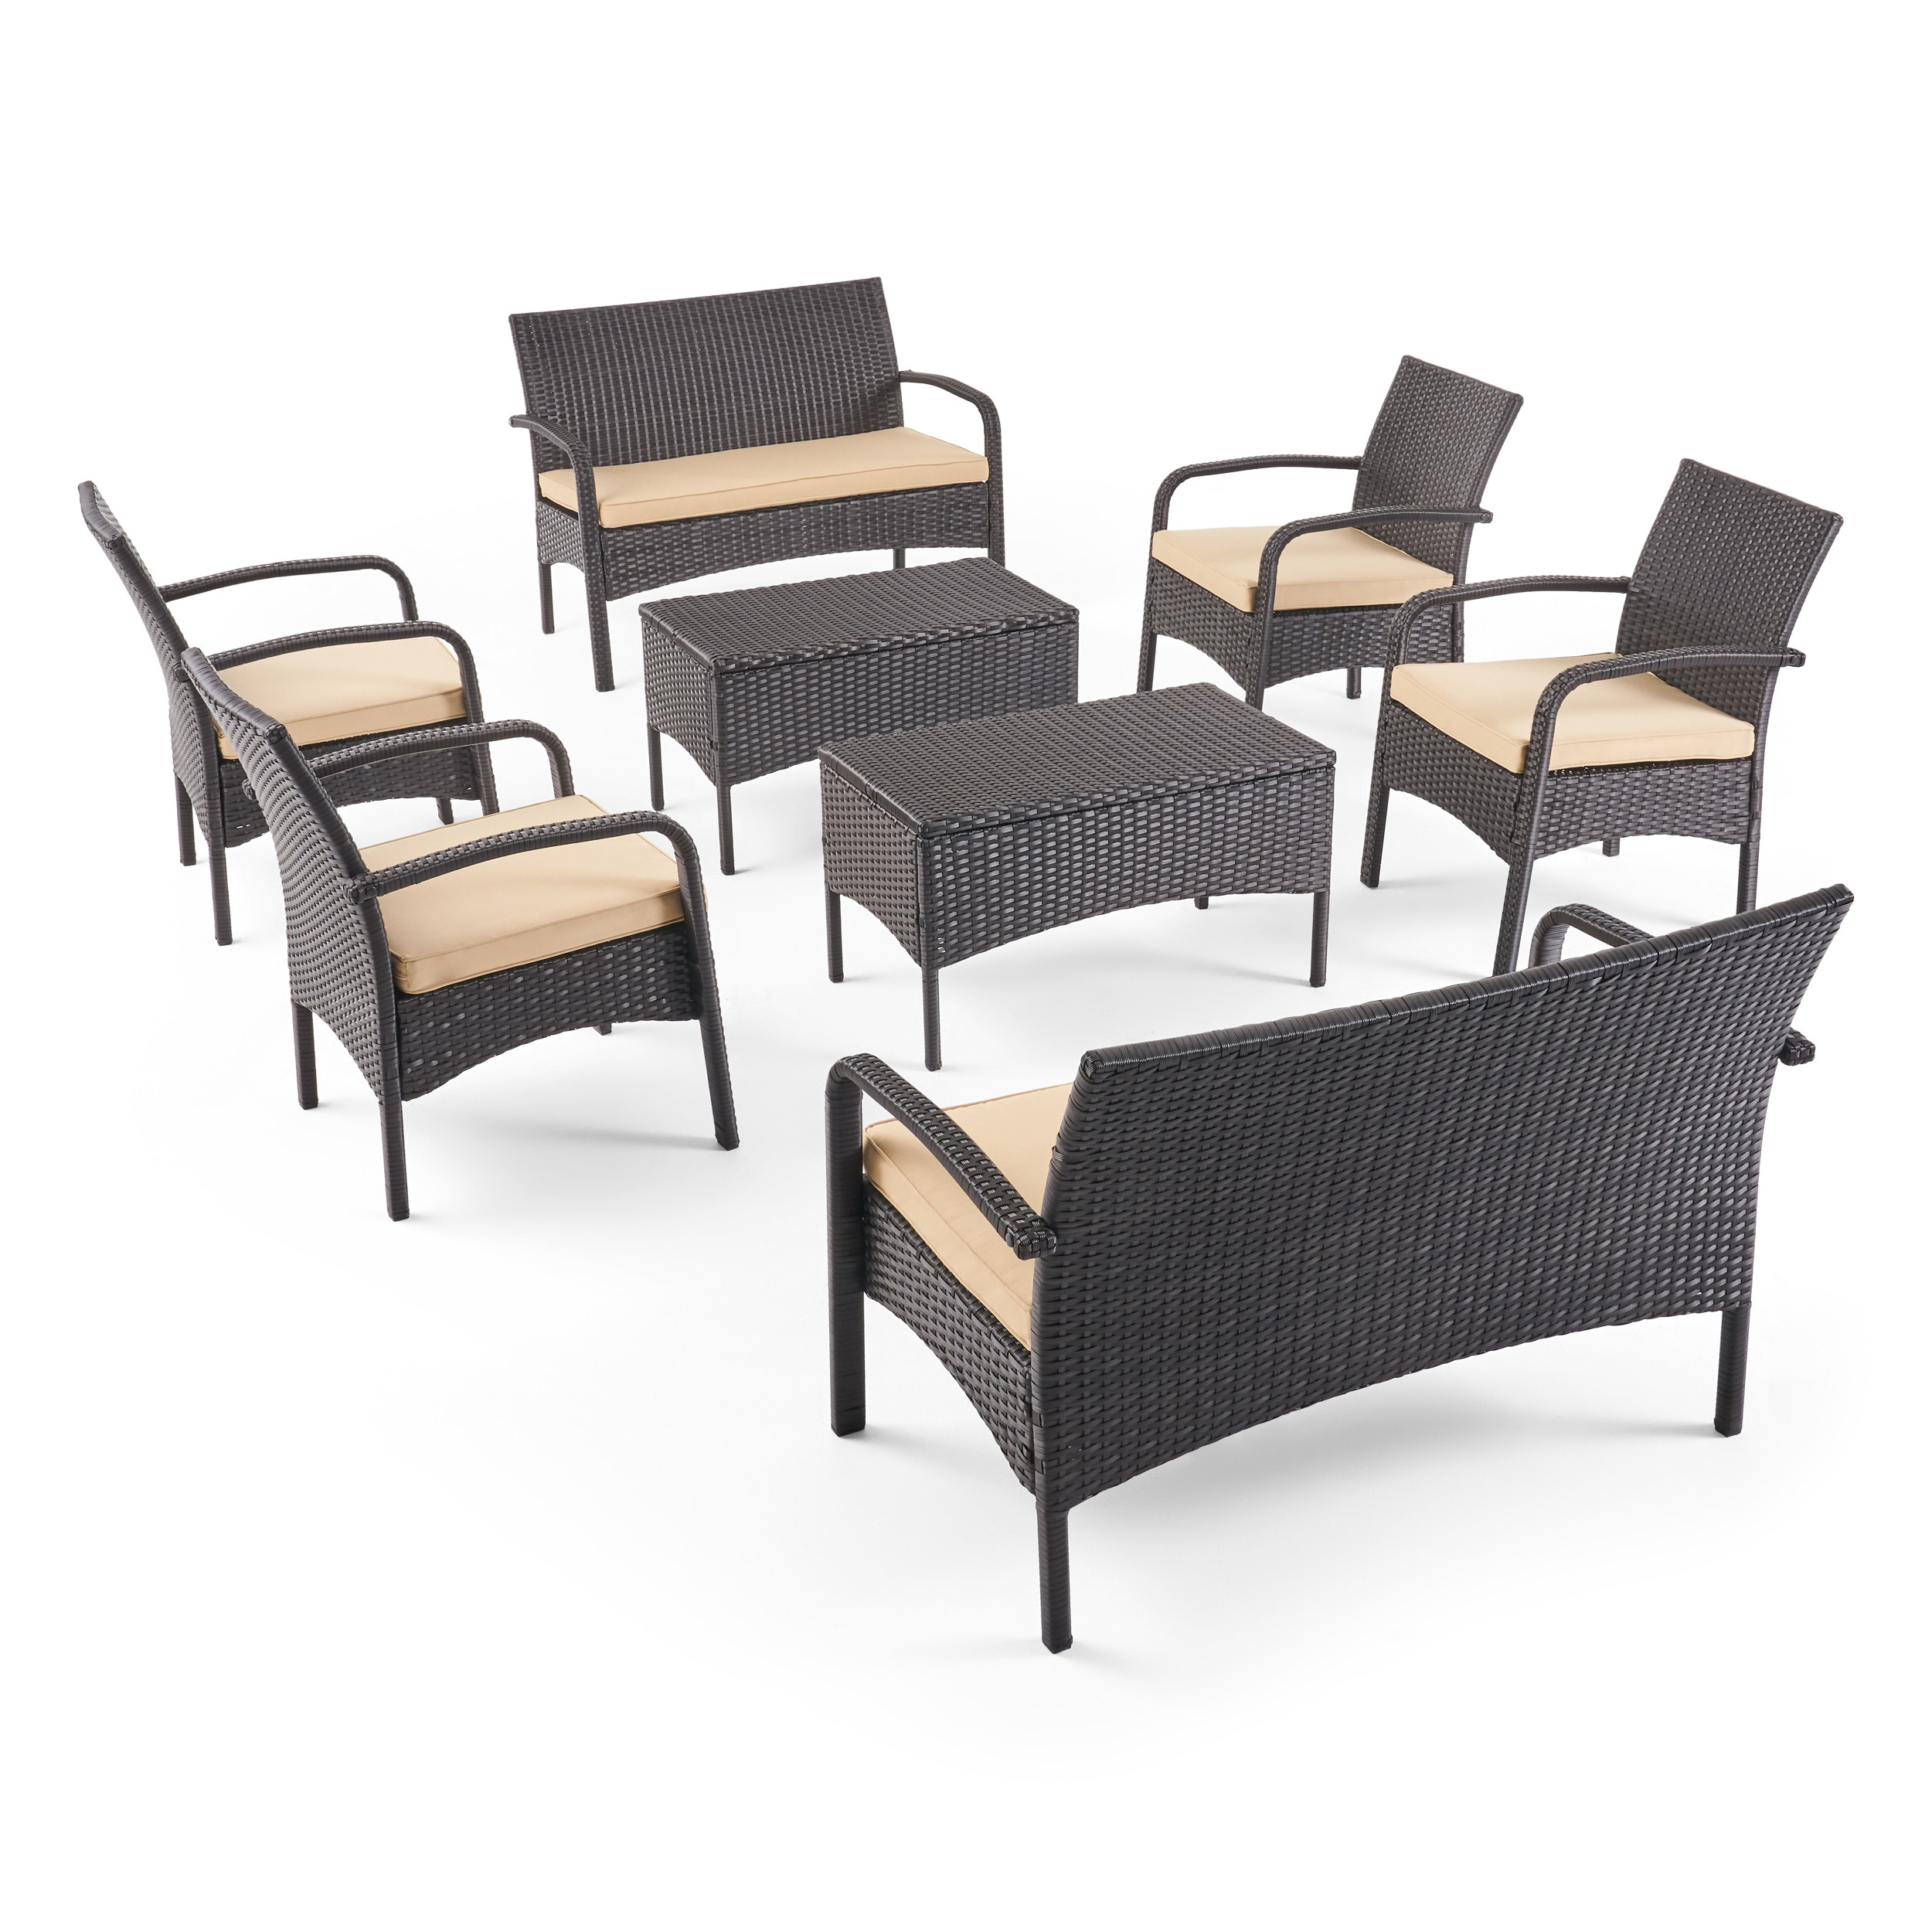 Carmela Outdoor 8 Seater Wicker Chat Set with Cushions, Brown and Tan - image 1 of 11